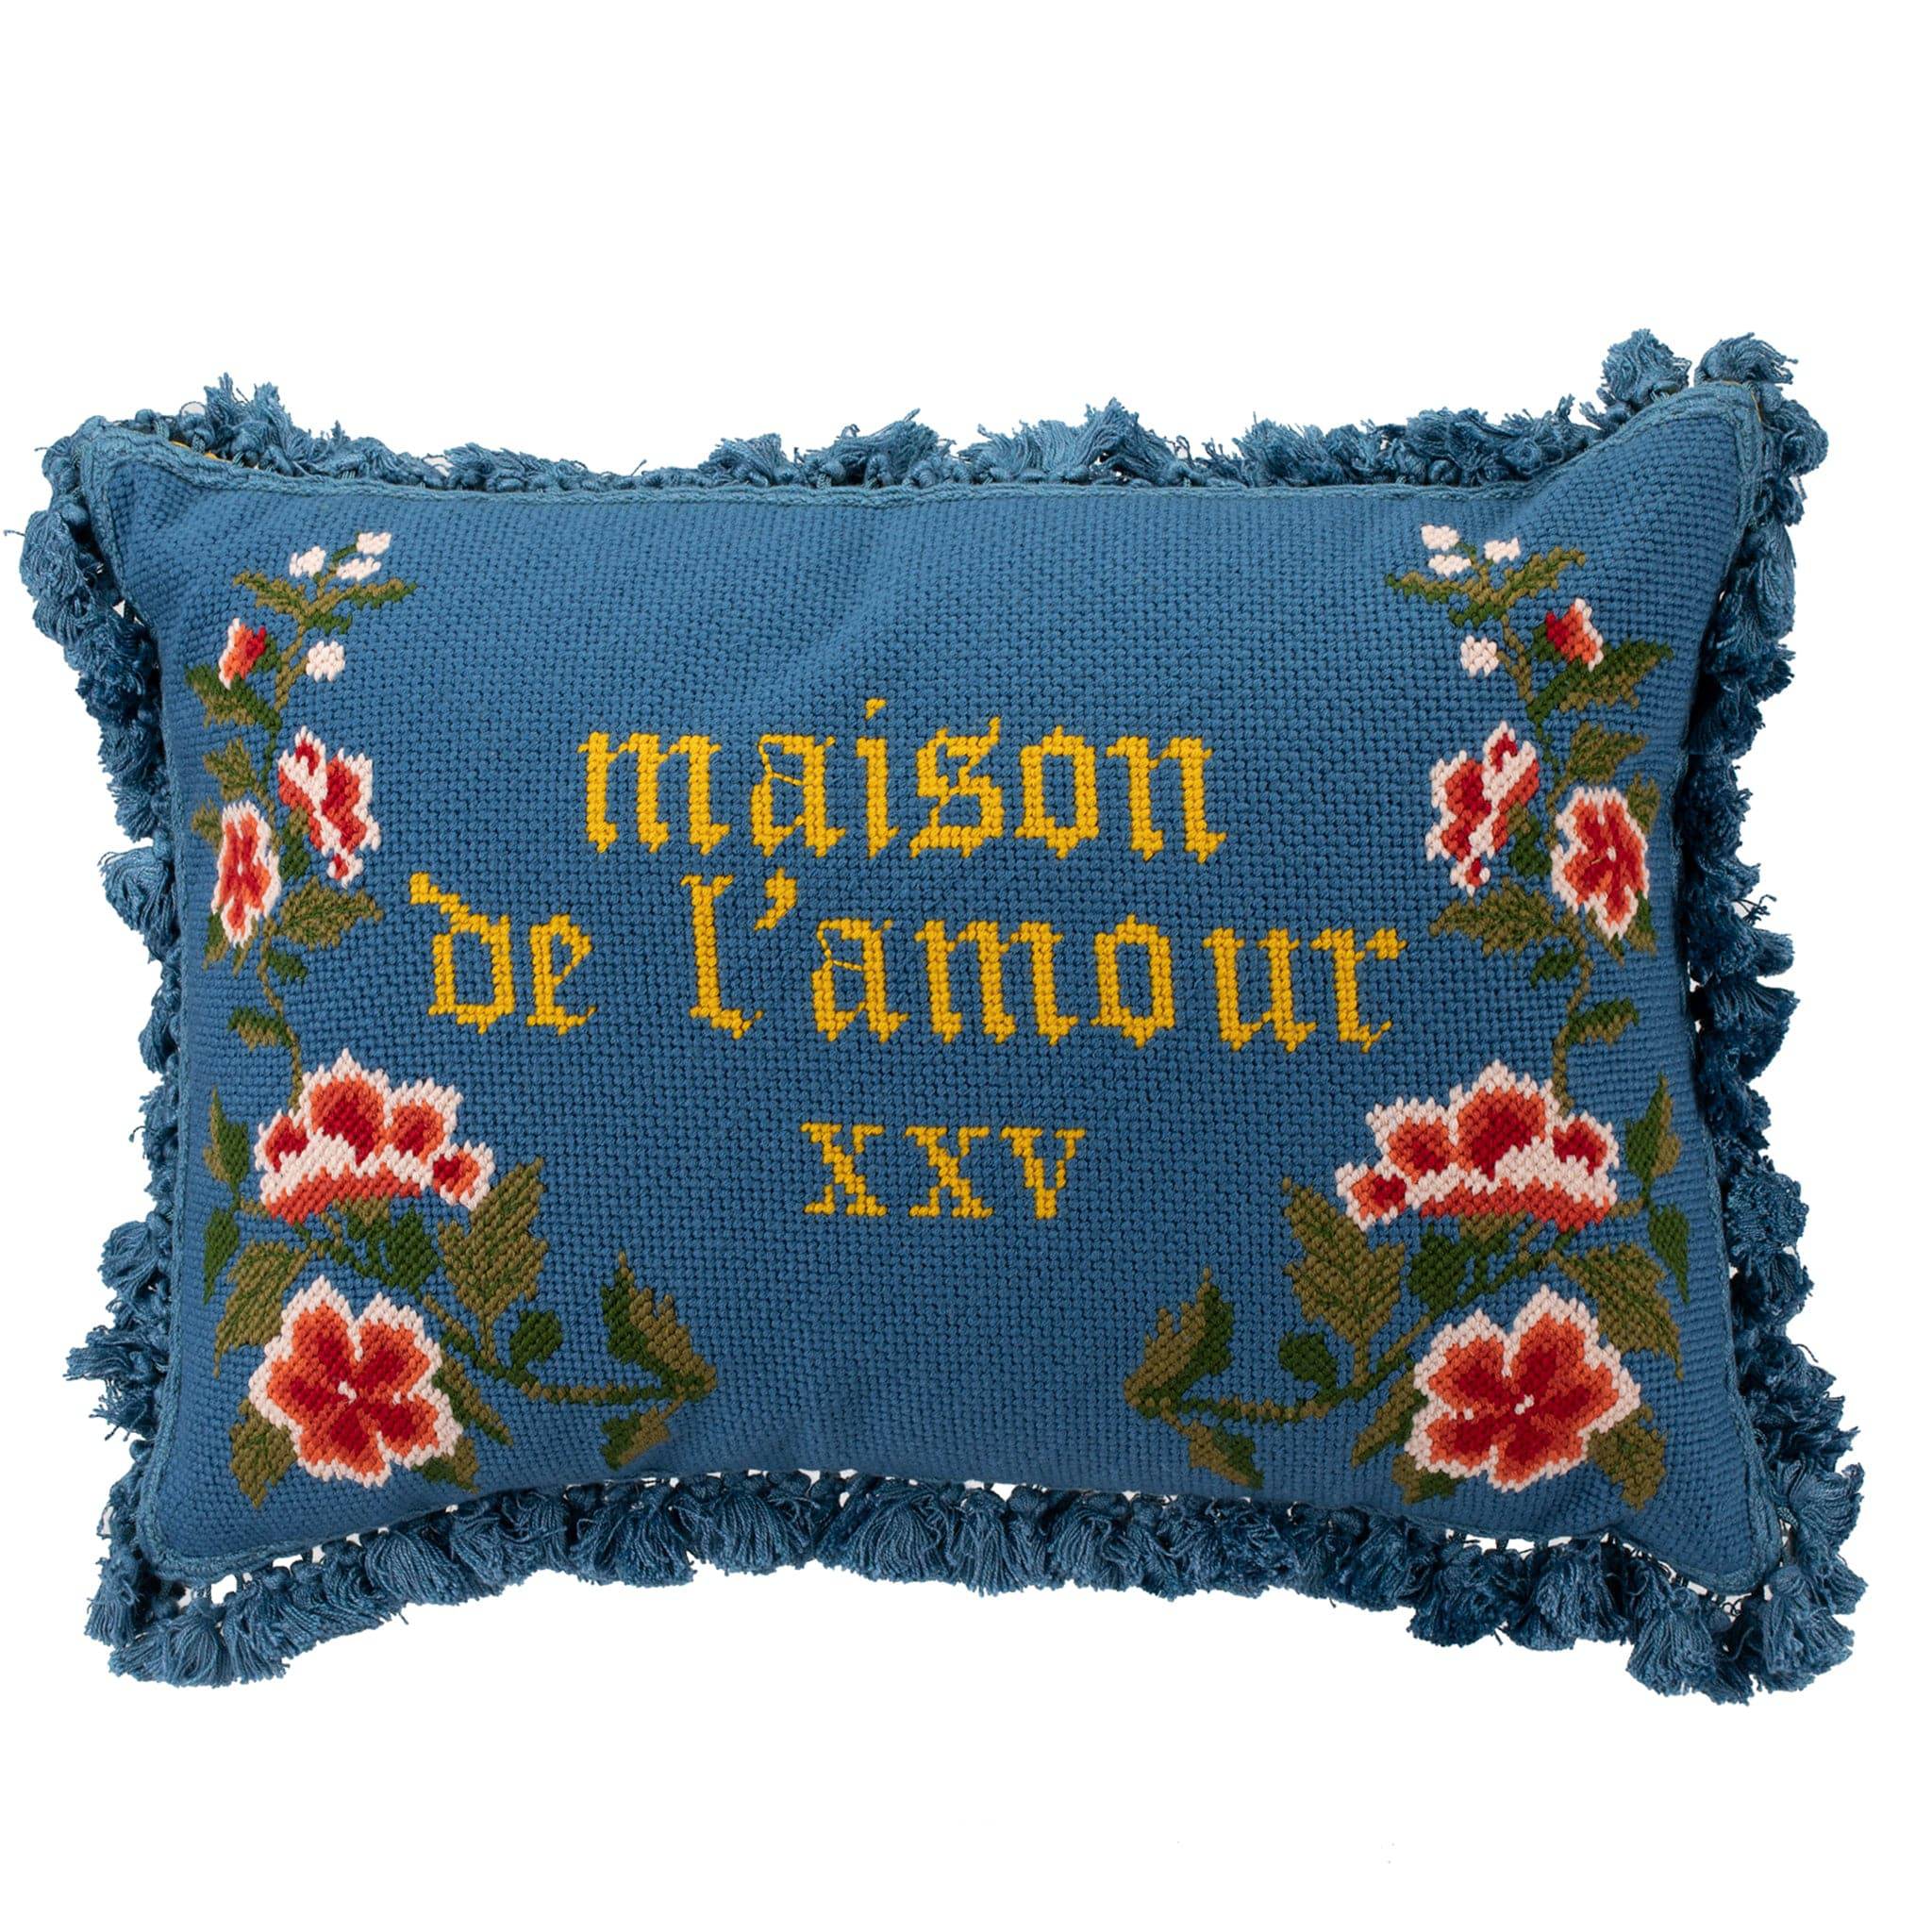 GUCCI NEEDLE POINT MAISON DE L'AMOUR CUSHION WITH EMBROIDERY - On Repeat